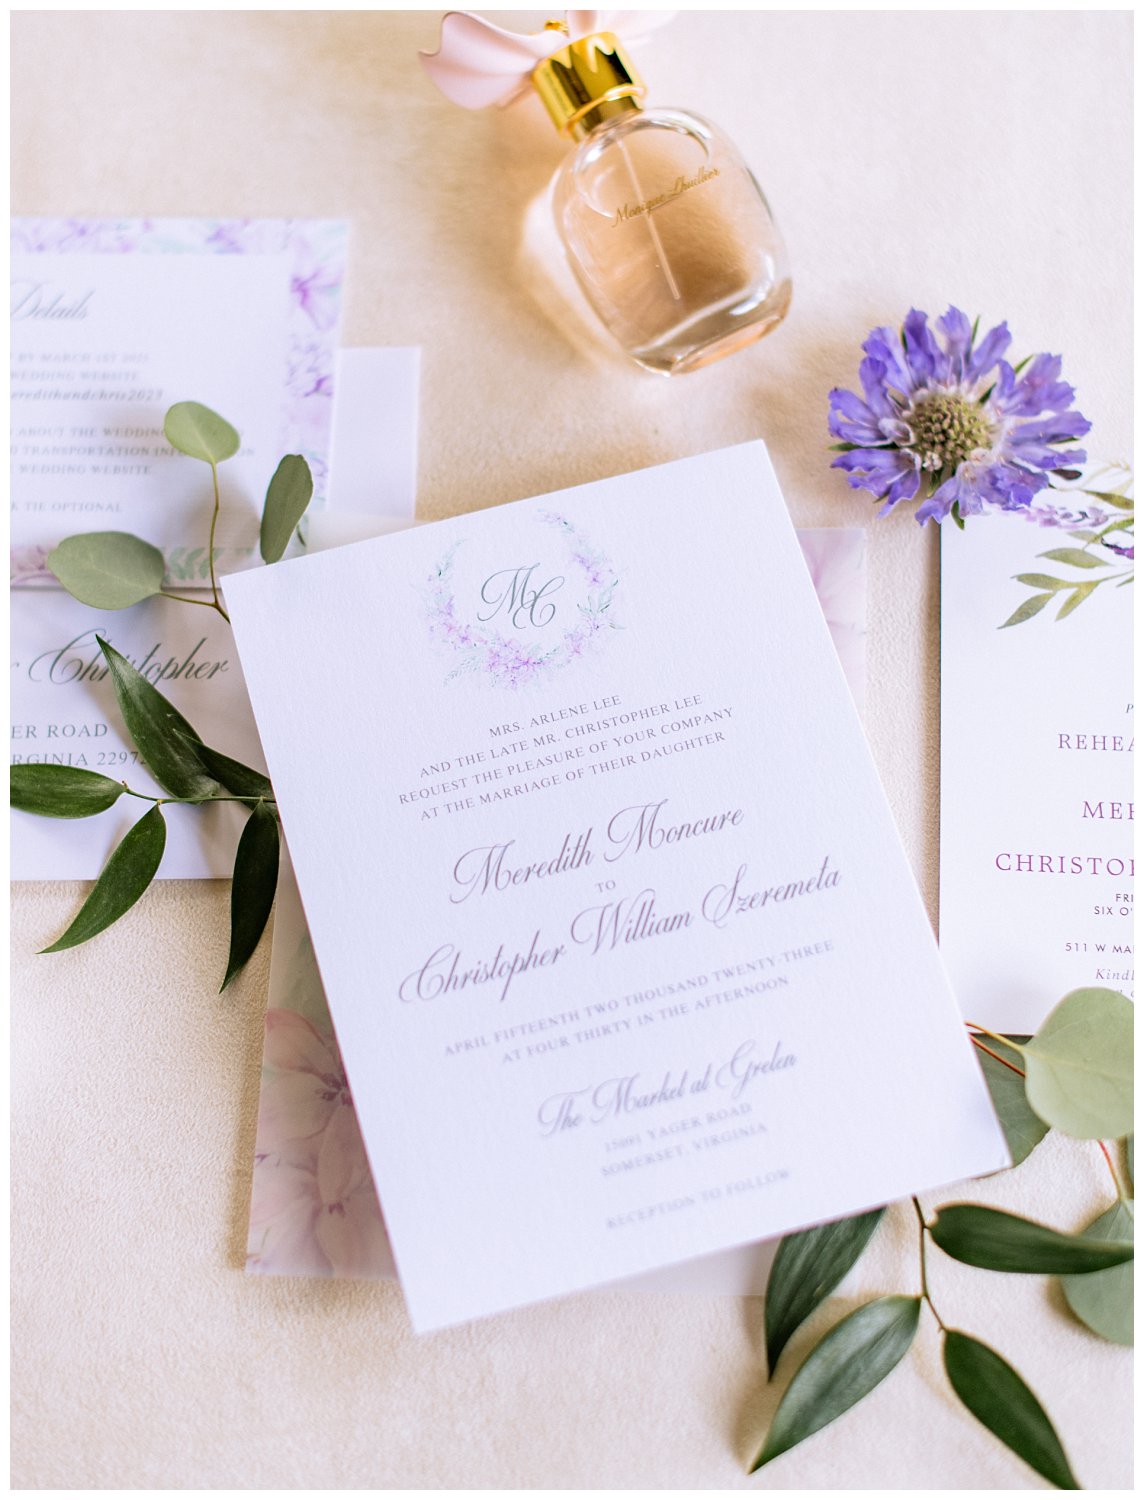 Invitation details for Spring Wedding at The Market at Grelen photographed by Heather Dodge Photography